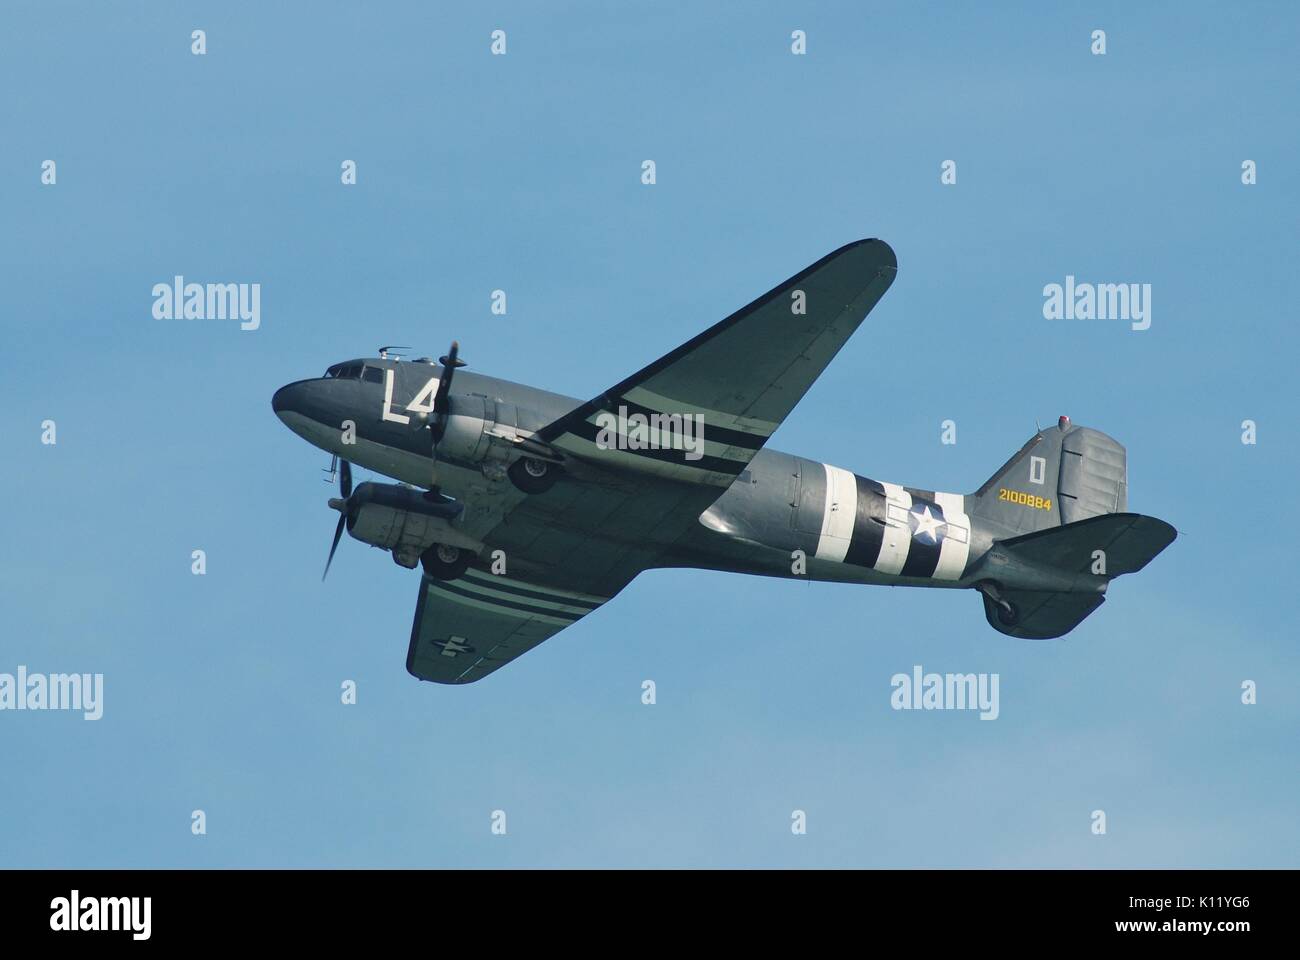 Douglas C-47A Dakota, 2100884, displays at the Airbourne airshow in Eastbourne, England on August 11, 2012. The aircraft is in USAF markings. Stock Photo